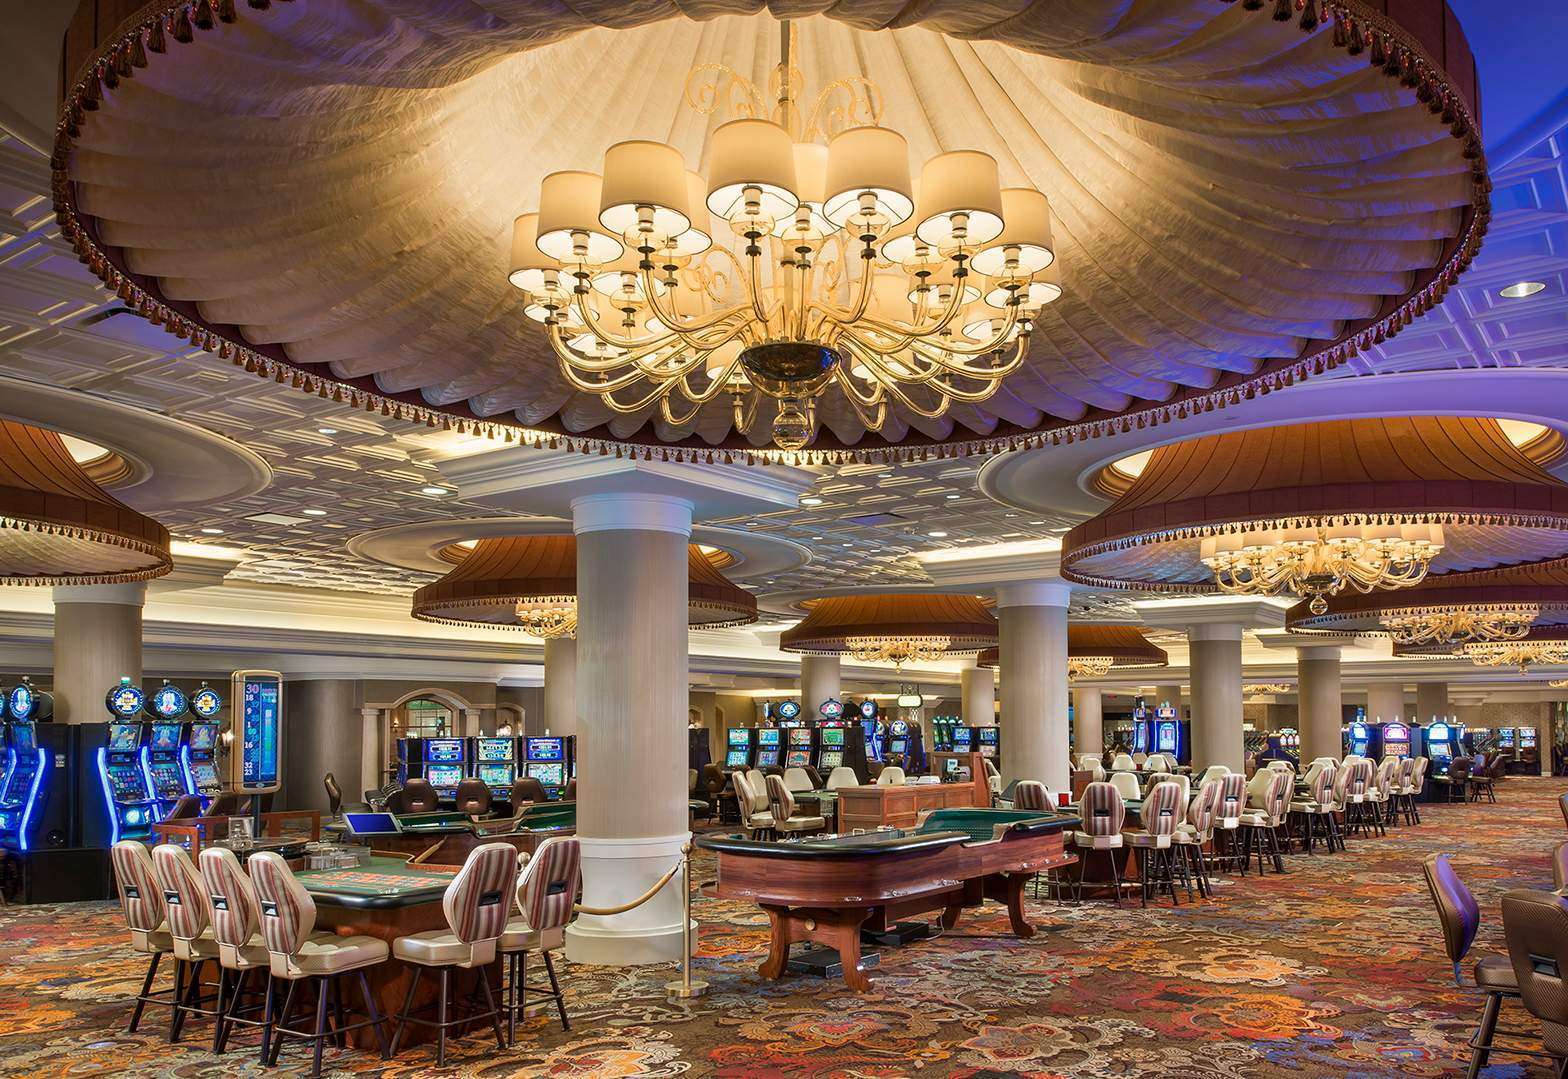 turning stone casino rooms in the lodge